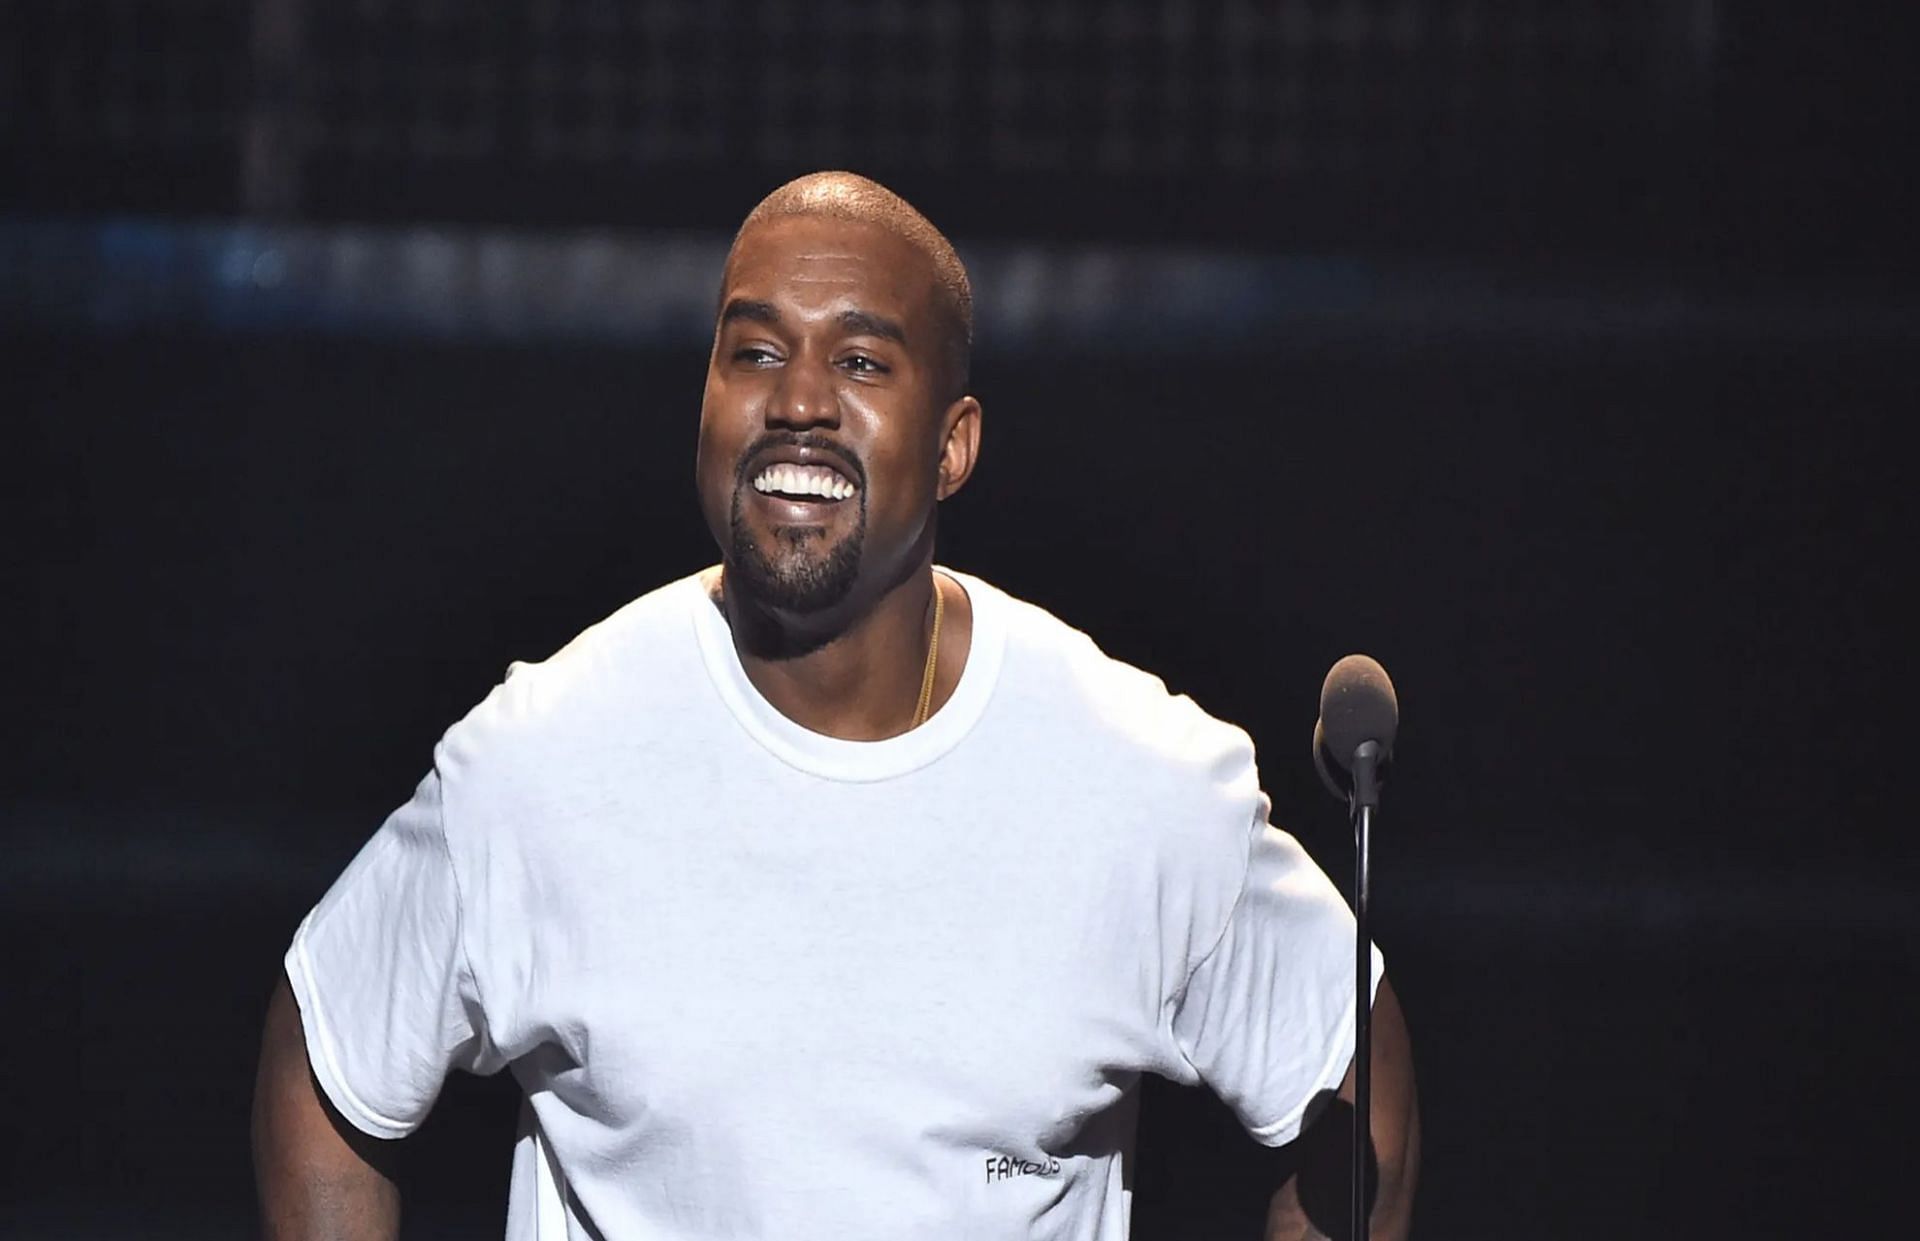 Kanye West reveals album art for new song (Image via Getty Images)